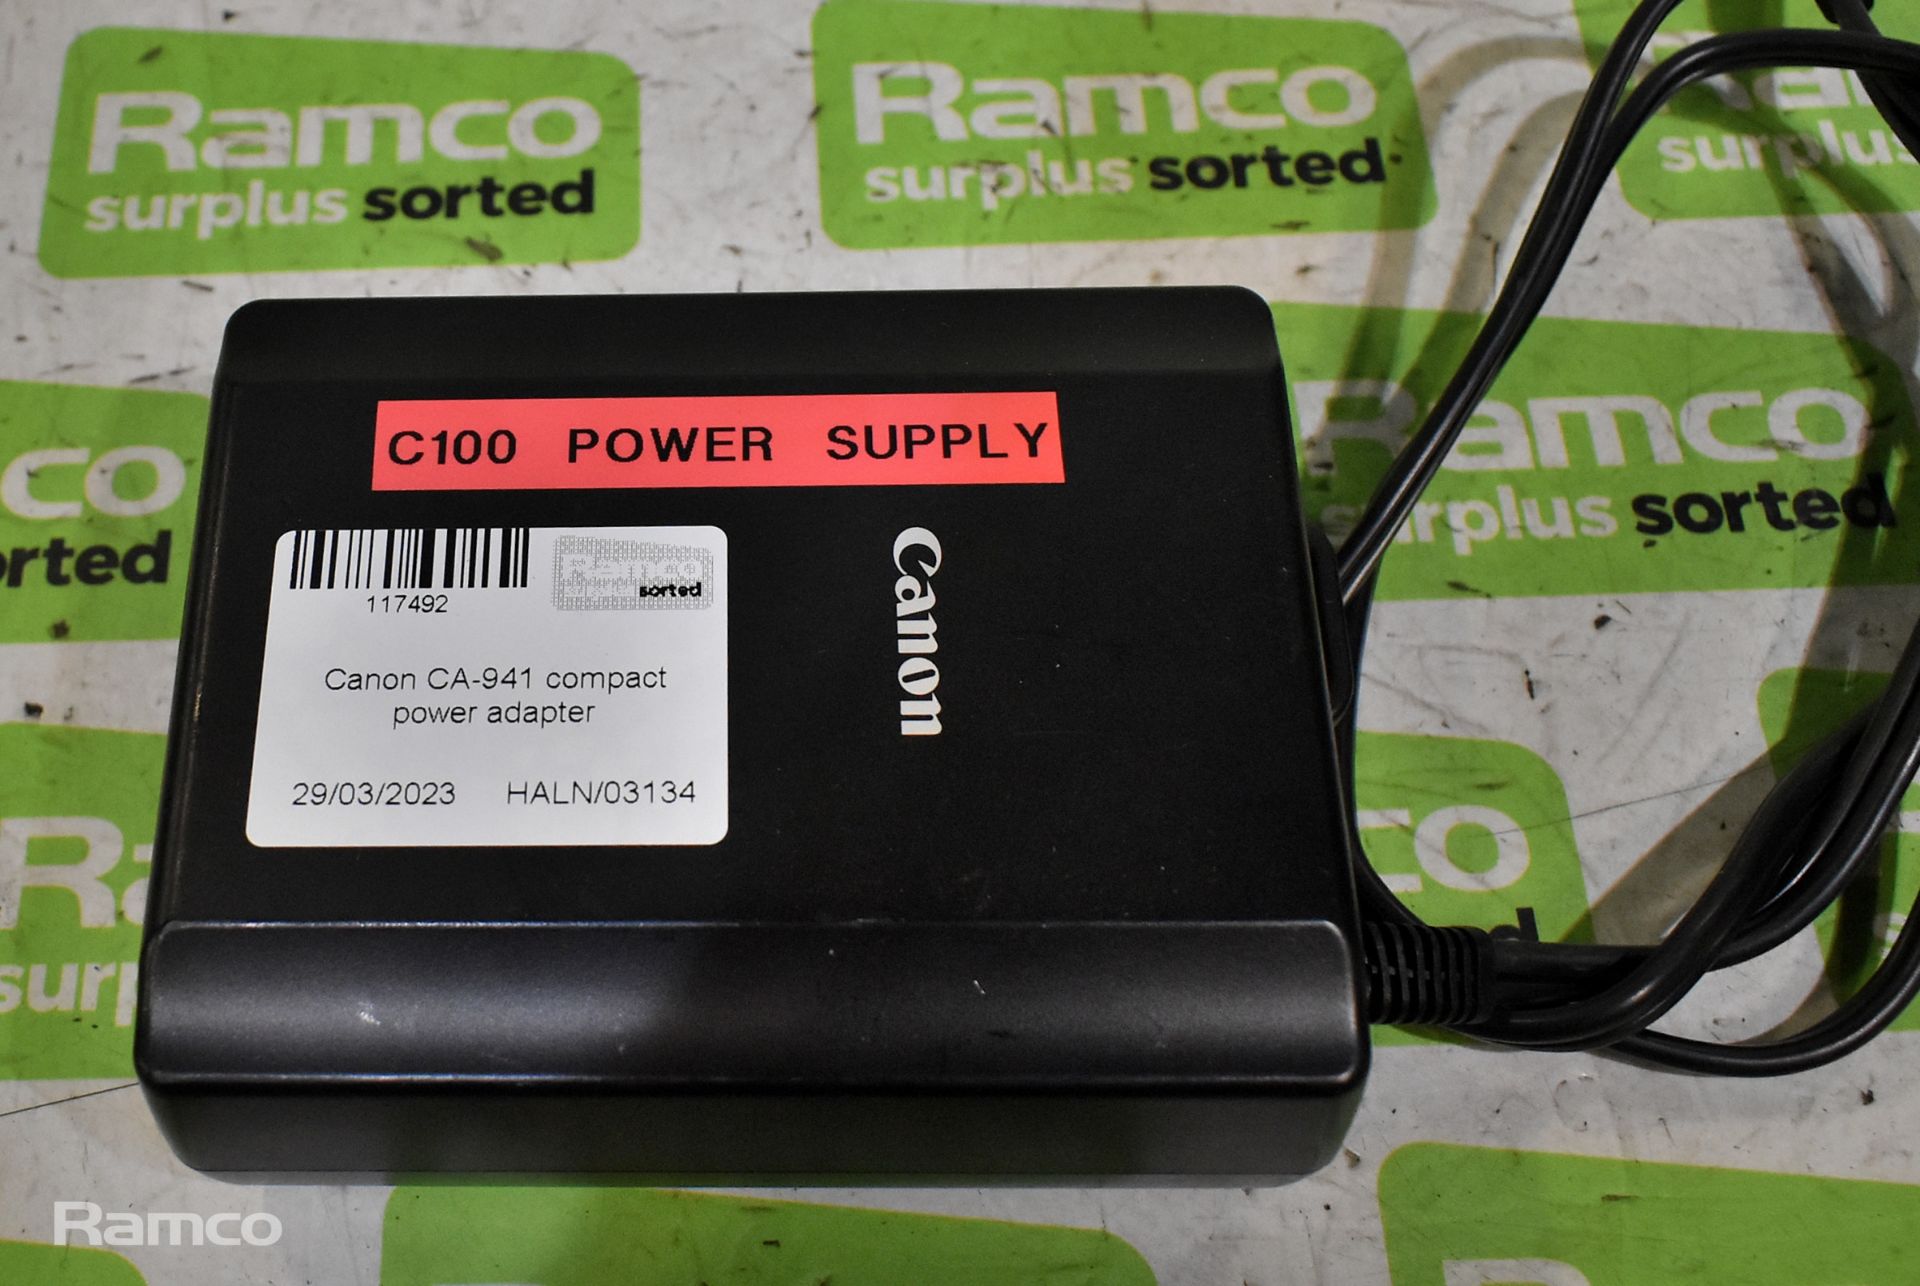 2x Canon CA-941 compact power adapters - Image 2 of 4